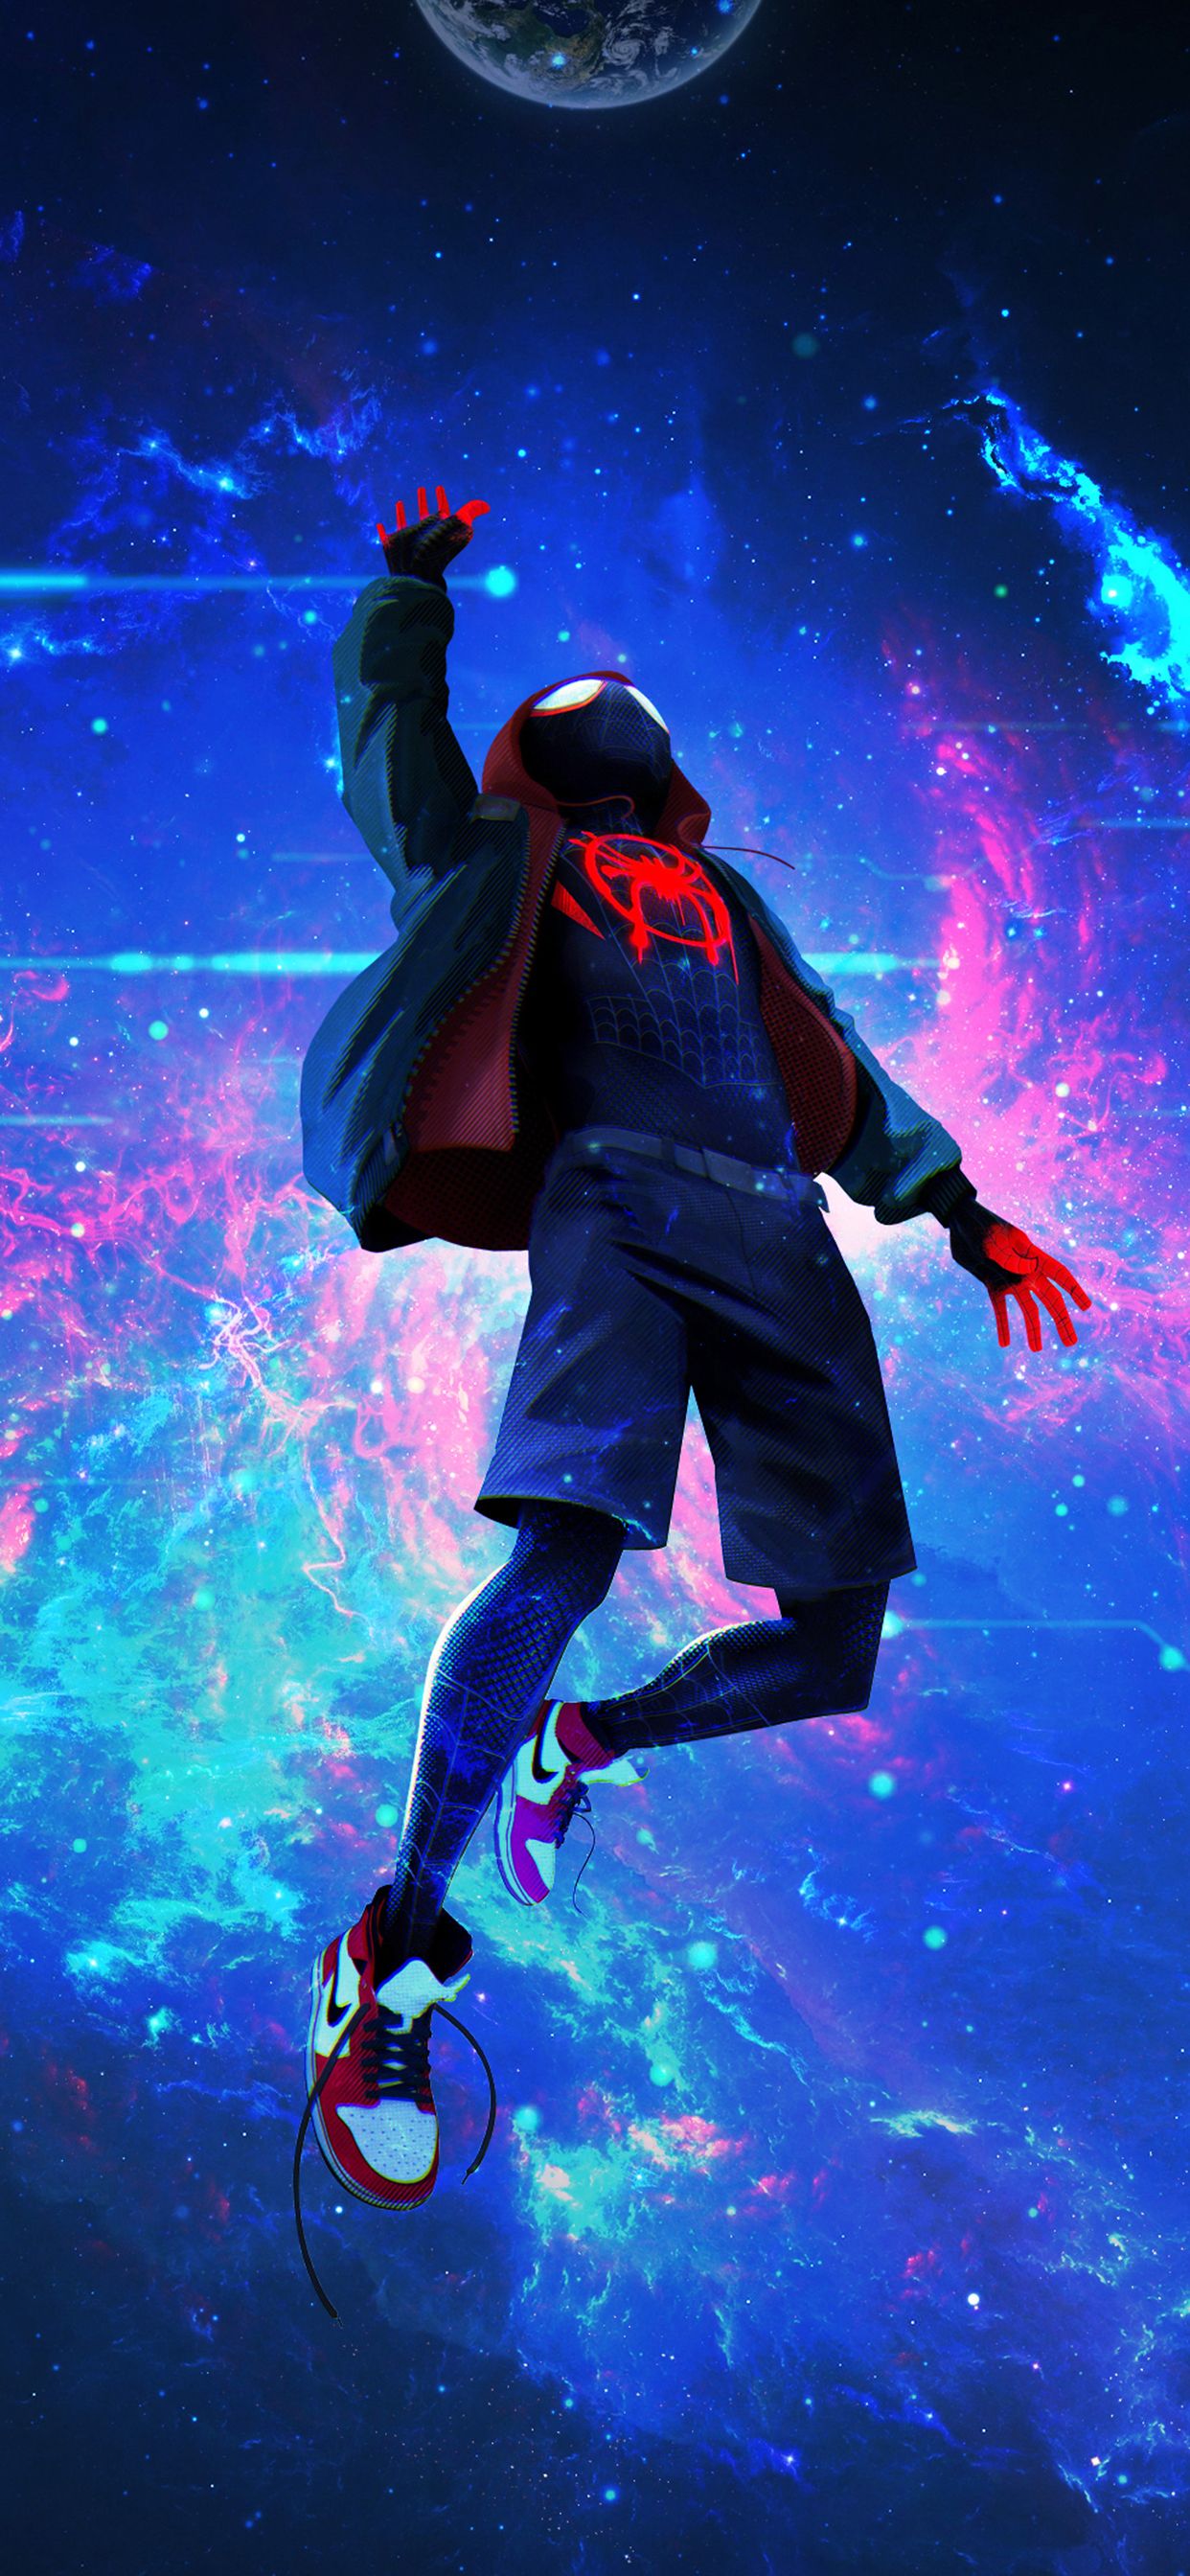 Update more than 70 miles morales phone wallpaper - in.cdgdbentre